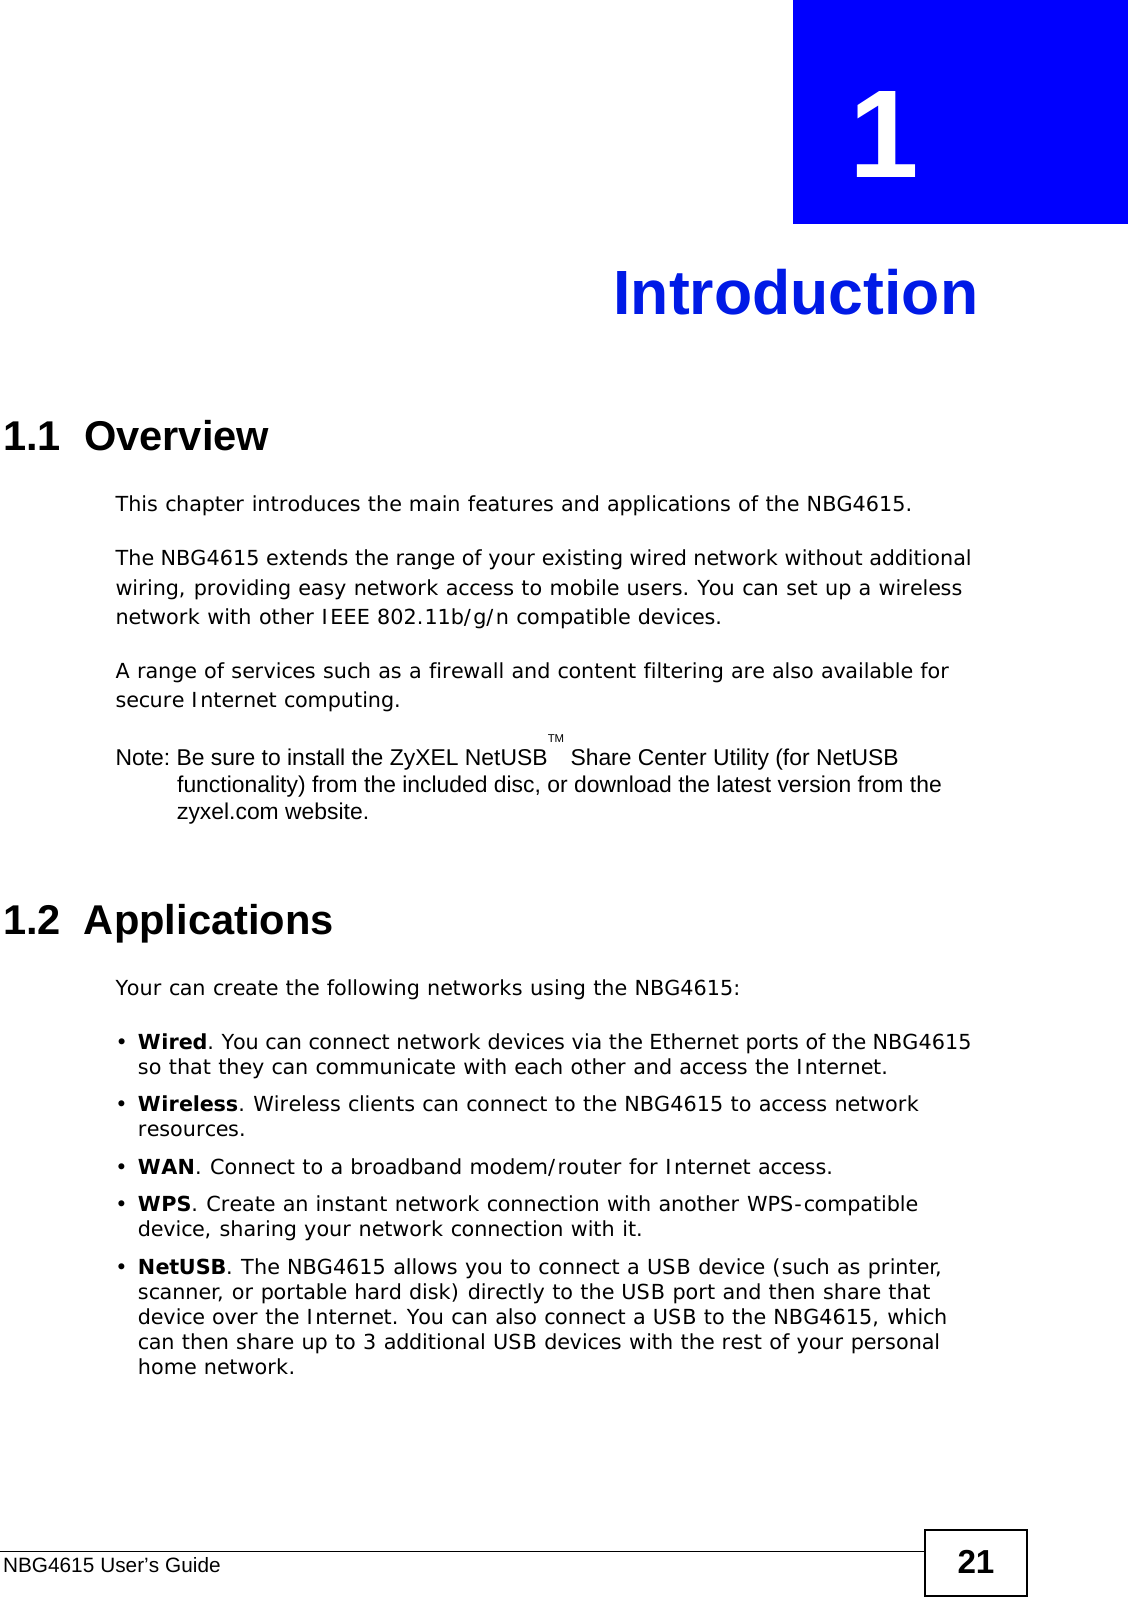 NBG4615 User’s Guide 21CHAPTER  1 Introduction1.1  OverviewThis chapter introduces the main features and applications of the NBG4615.The NBG4615 extends the range of your existing wired network without additional wiring, providing easy network access to mobile users. You can set up a wireless network with other IEEE 802.11b/g/n compatible devices.A range of services such as a firewall and content filtering are also available for secure Internet computing. Note: Be sure to install the ZyXEL NetUSBTM Share Center Utility (for NetUSB functionality) from the included disc, or download the latest version from the zyxel.com website.1.2  ApplicationsYour can create the following networks using the NBG4615:•Wired. You can connect network devices via the Ethernet ports of the NBG4615 so that they can communicate with each other and access the Internet.•Wireless. Wireless clients can connect to the NBG4615 to access network resources.•WAN. Connect to a broadband modem/router for Internet access.•WPS. Create an instant network connection with another WPS-compatible device, sharing your network connection with it.•NetUSB. The NBG4615 allows you to connect a USB device (such as printer, scanner, or portable hard disk) directly to the USB port and then share that device over the Internet. You can also connect a USB to the NBG4615, which can then share up to 3 additional USB devices with the rest of your personal home network.